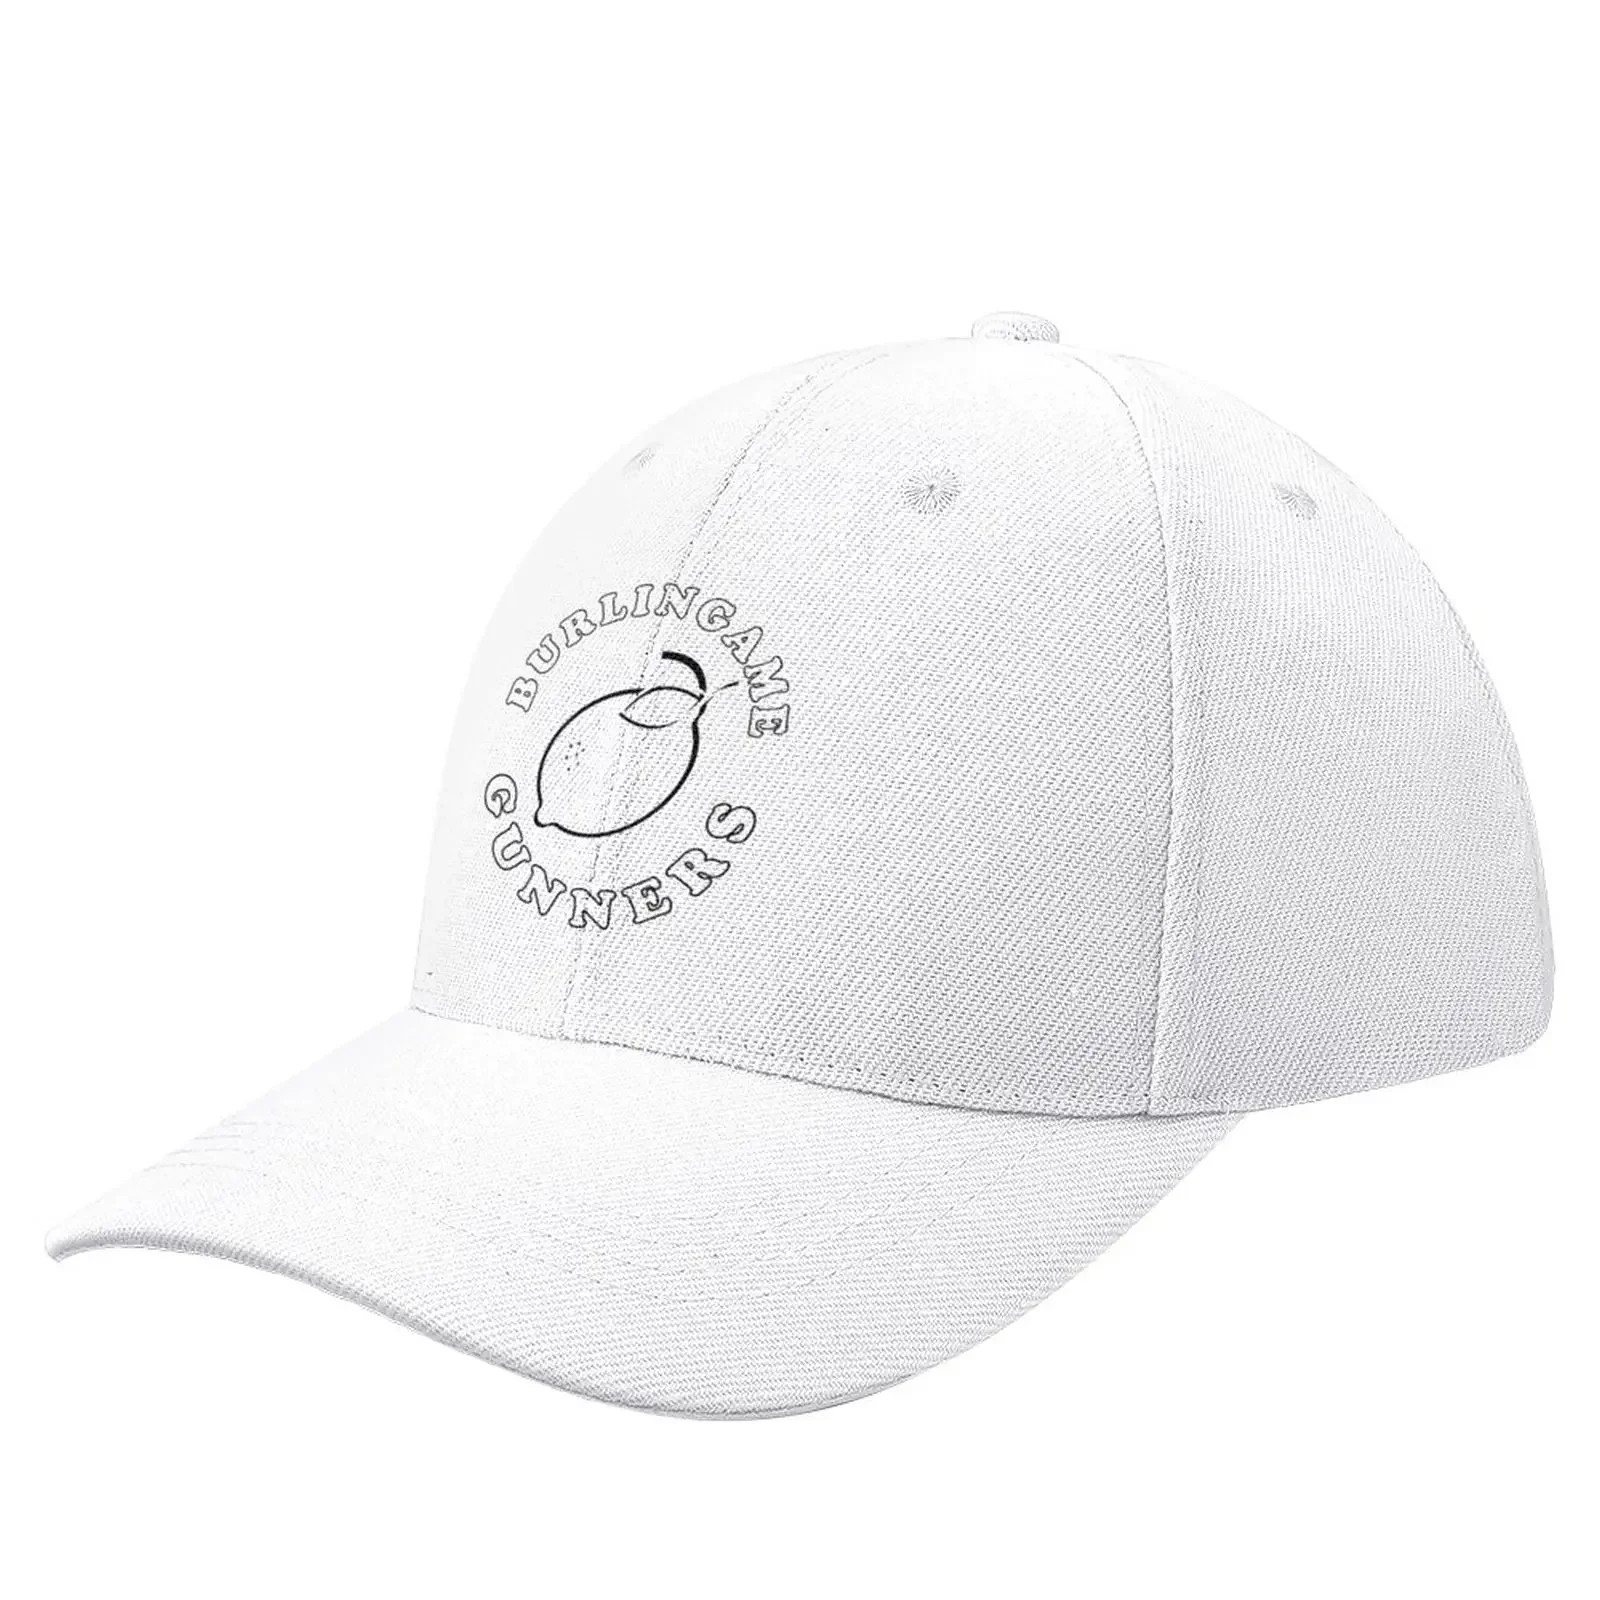 

Burlingame collection the gunners Baseball Cap cute funny hat Beach Outing Men Hat Women'S